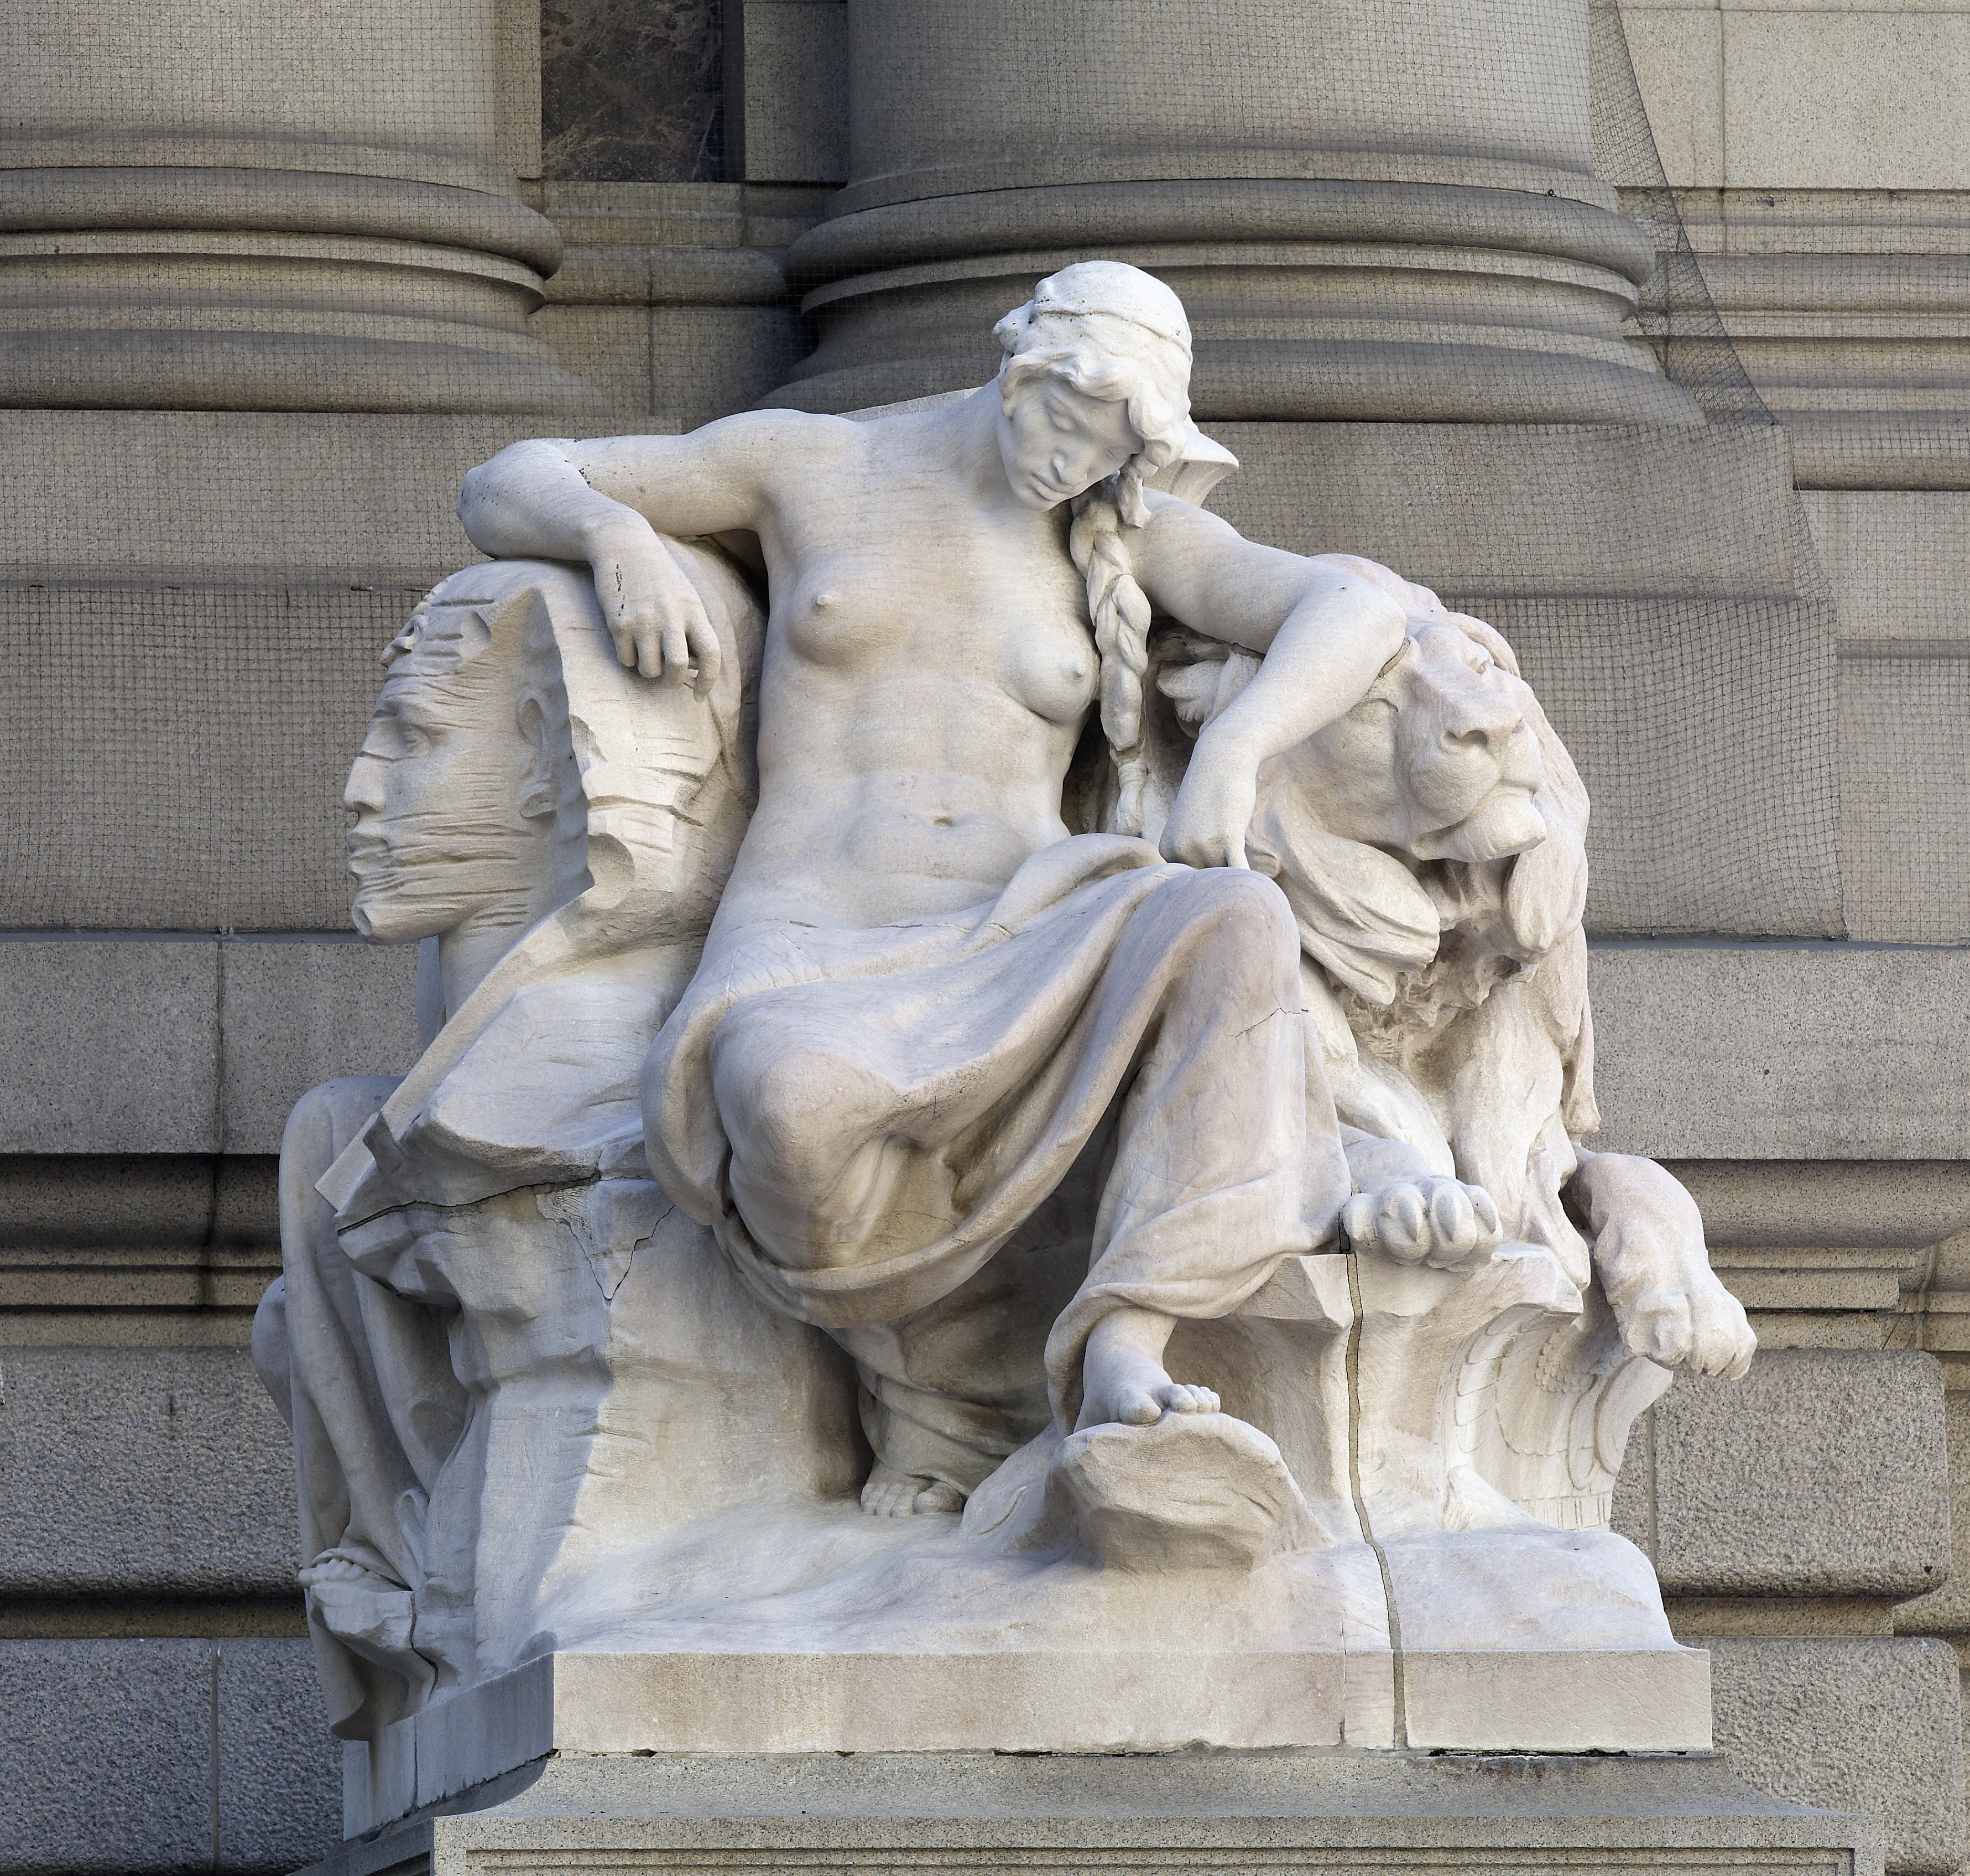 Daniel Chester French 'Africa' statue in front of the Alexander Hamilton U.S. Customs House. ©Carol M. Highsmith